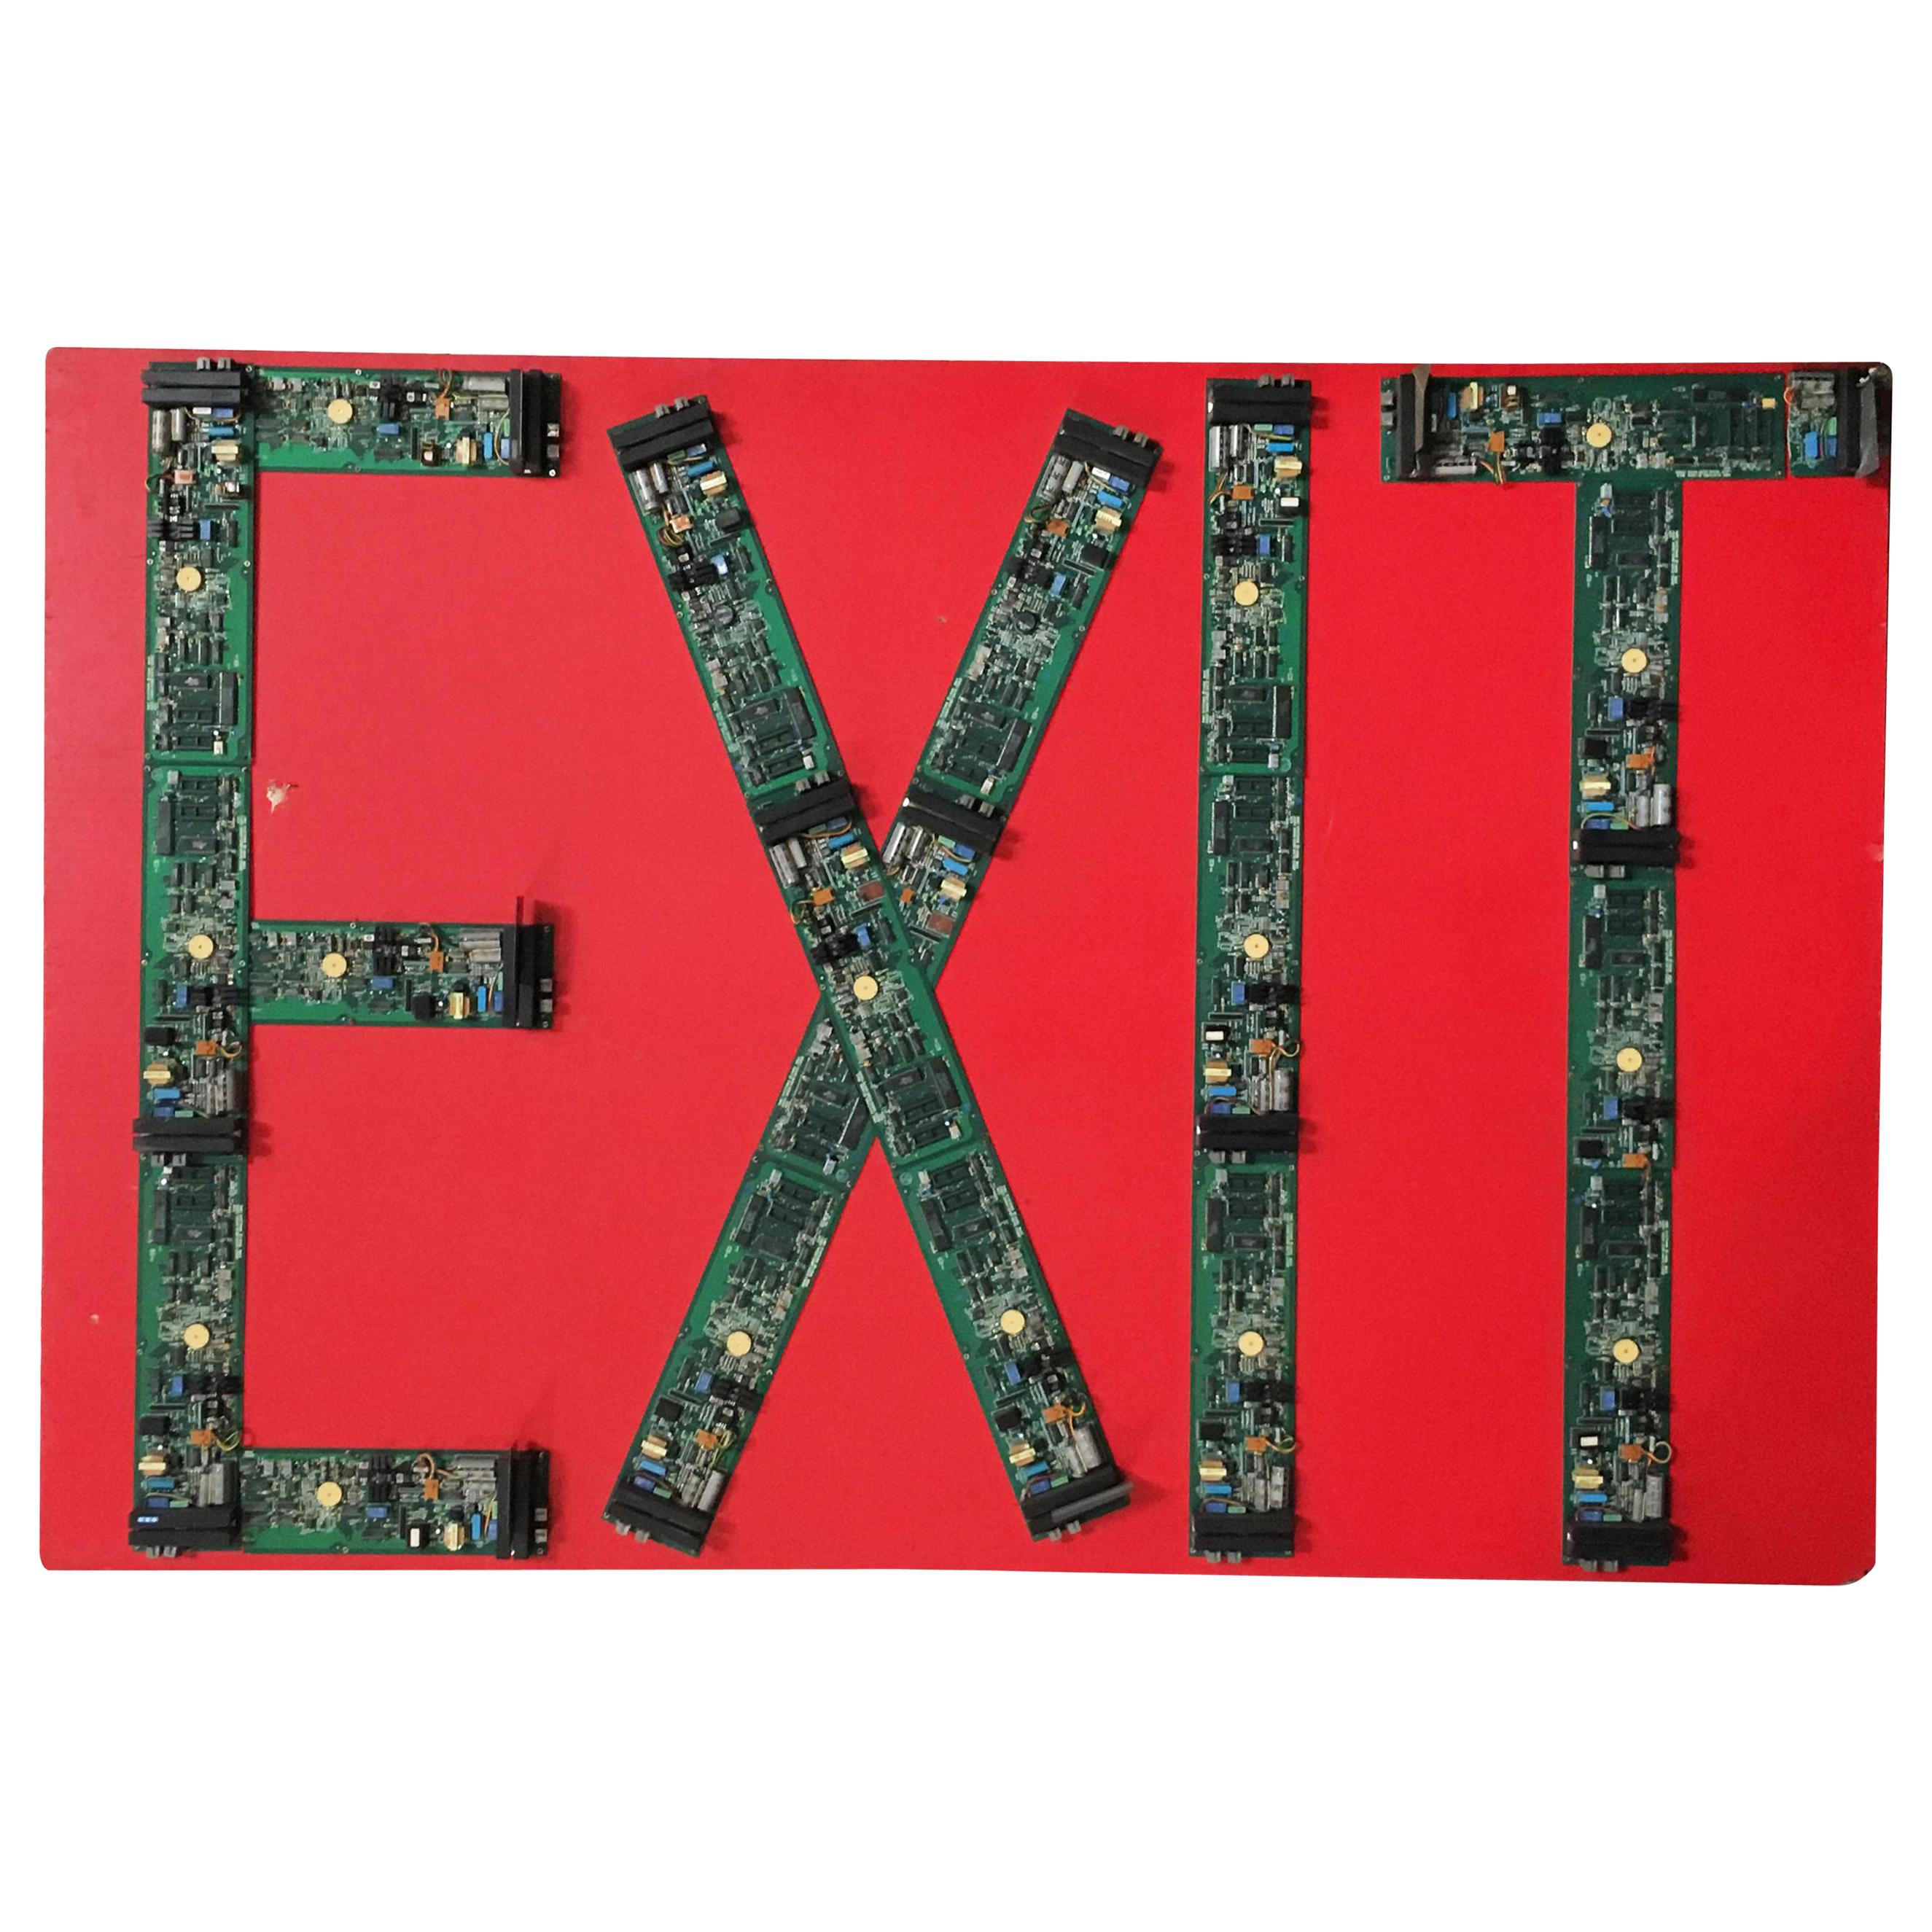 Abstract "Exit with Light" Artography Credit Card Machine Sculpture by Pasqual B For Sale